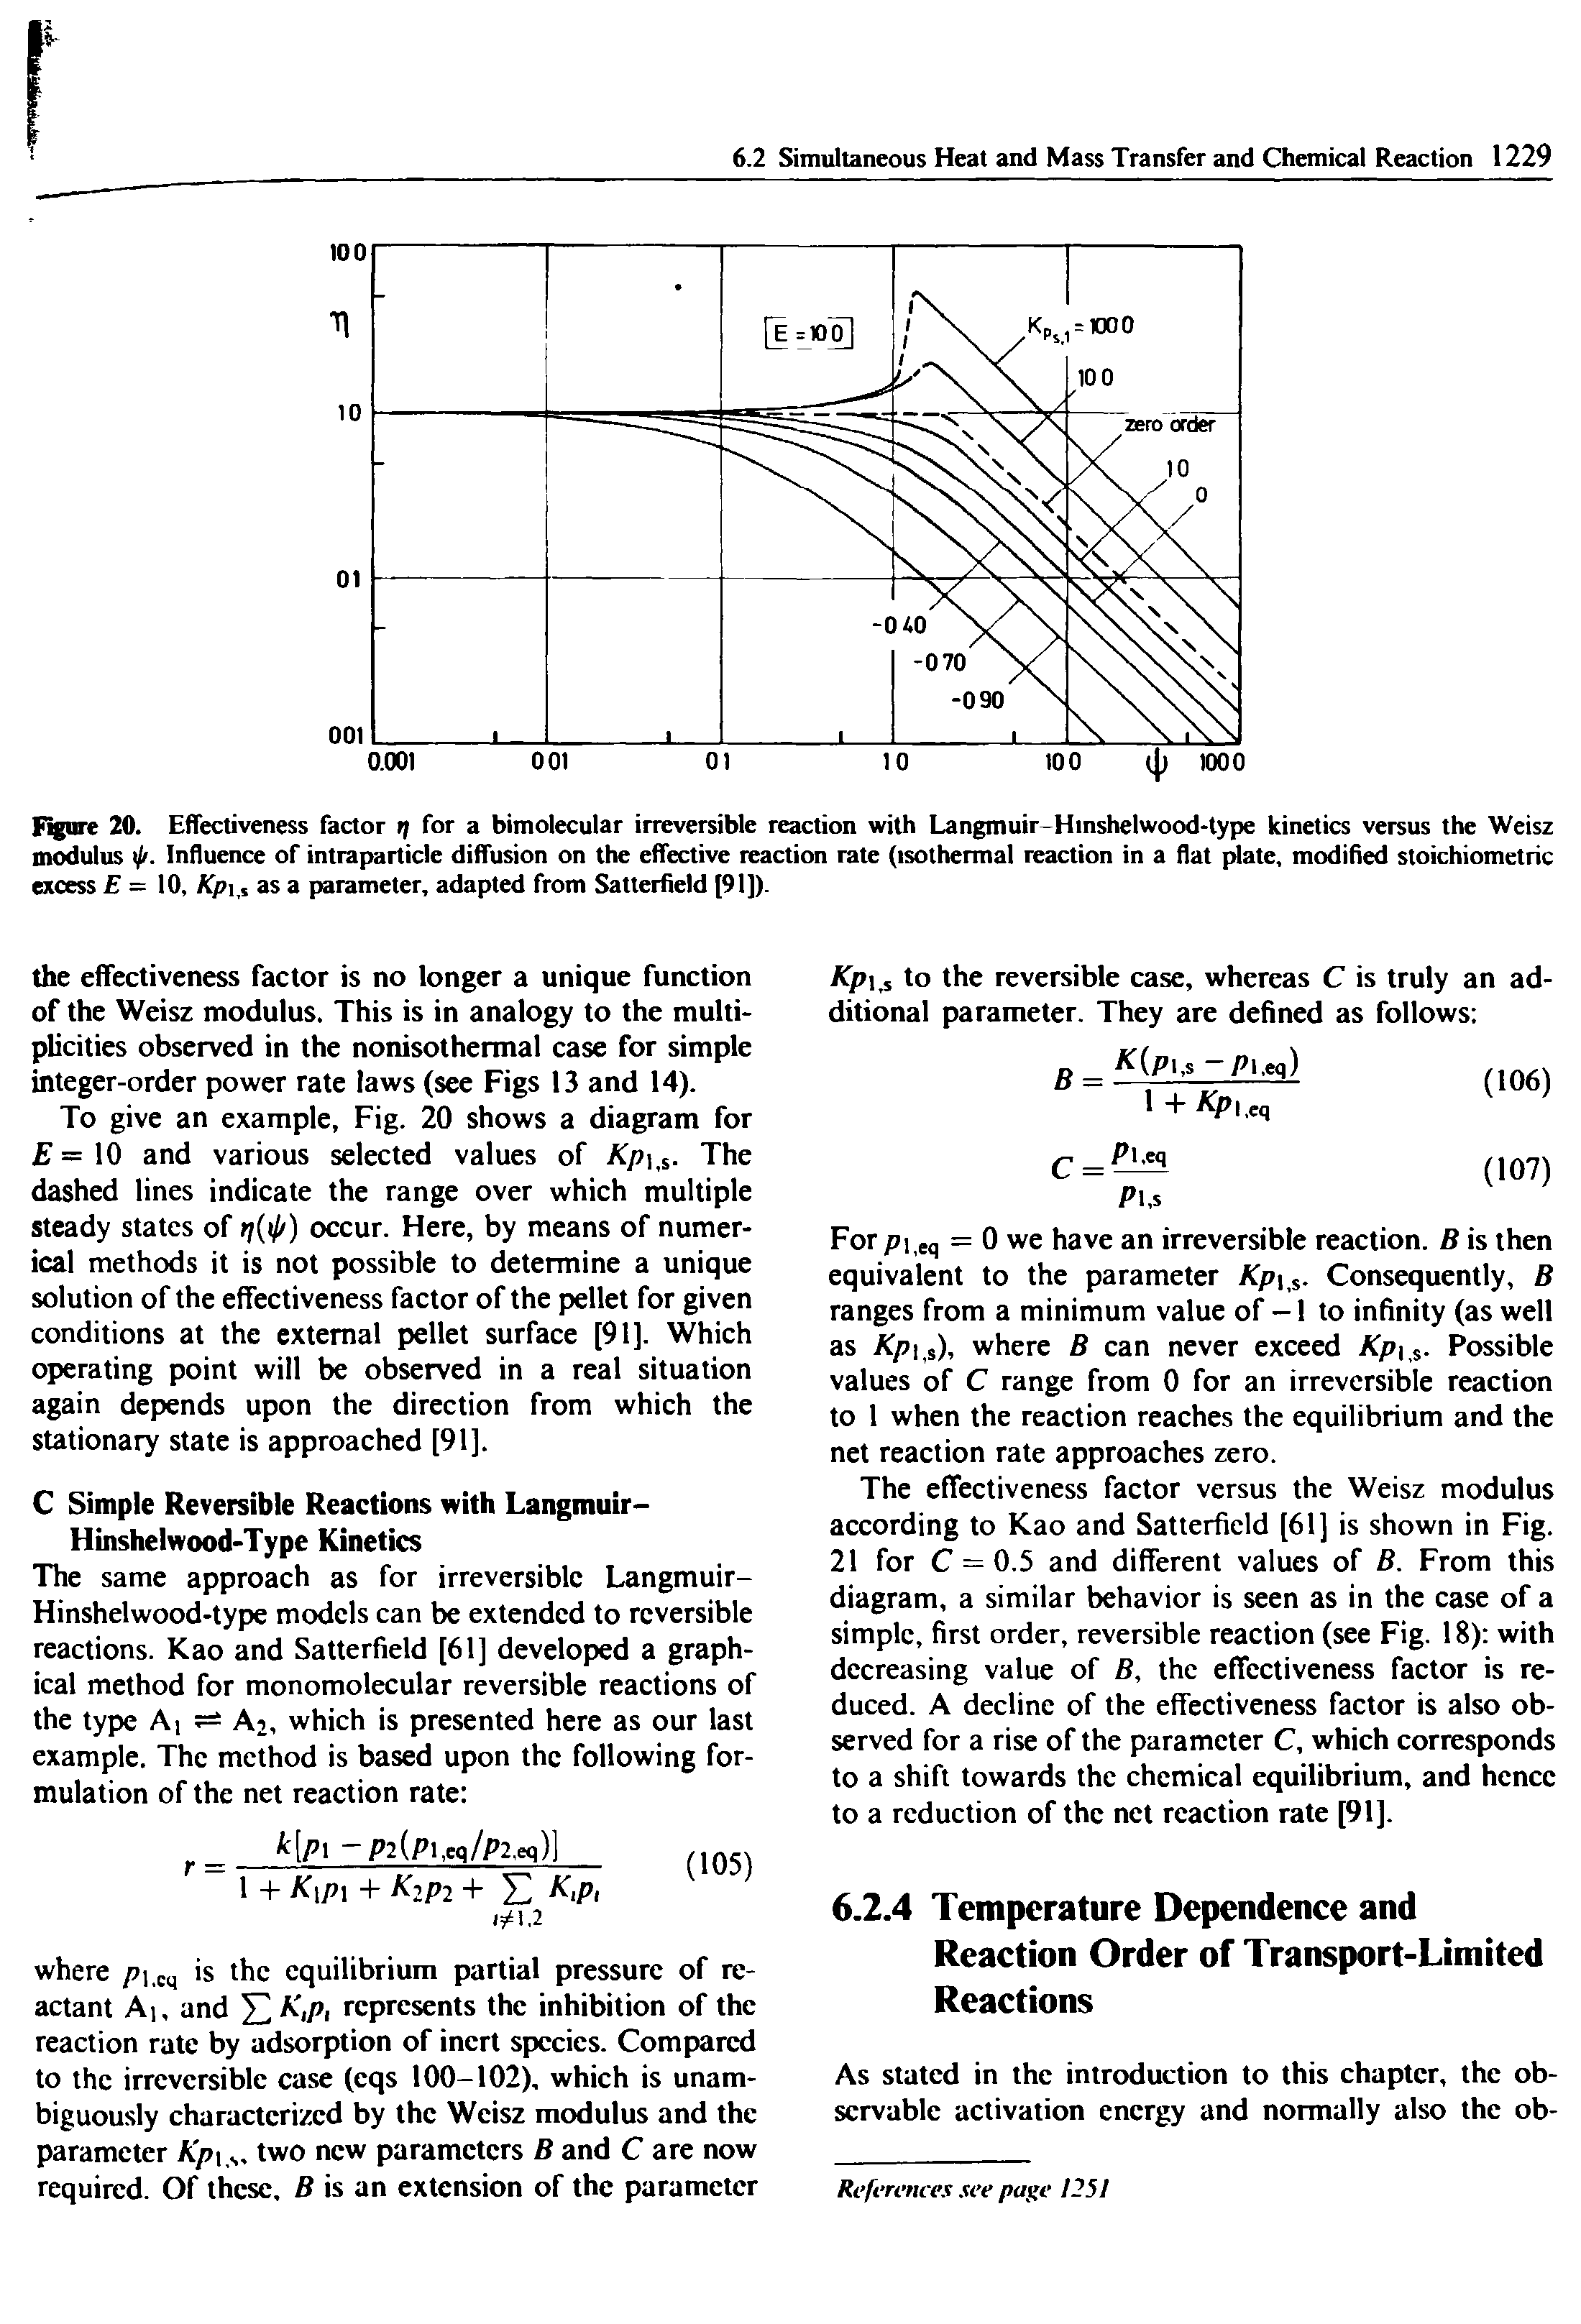 Figure 20. Effectiveness factor rj for a bimolecular irreversible reaction with Langmuir Hinshelwood-type kinetics versus the Weisz modulus ip. Influence of intraparticle diffusion on the effective reaction rate (isothermal reaction in a flat plate, modified stoichiometric excess E — 10, Kp it as a parameter, adapted from Satterfield [91]).